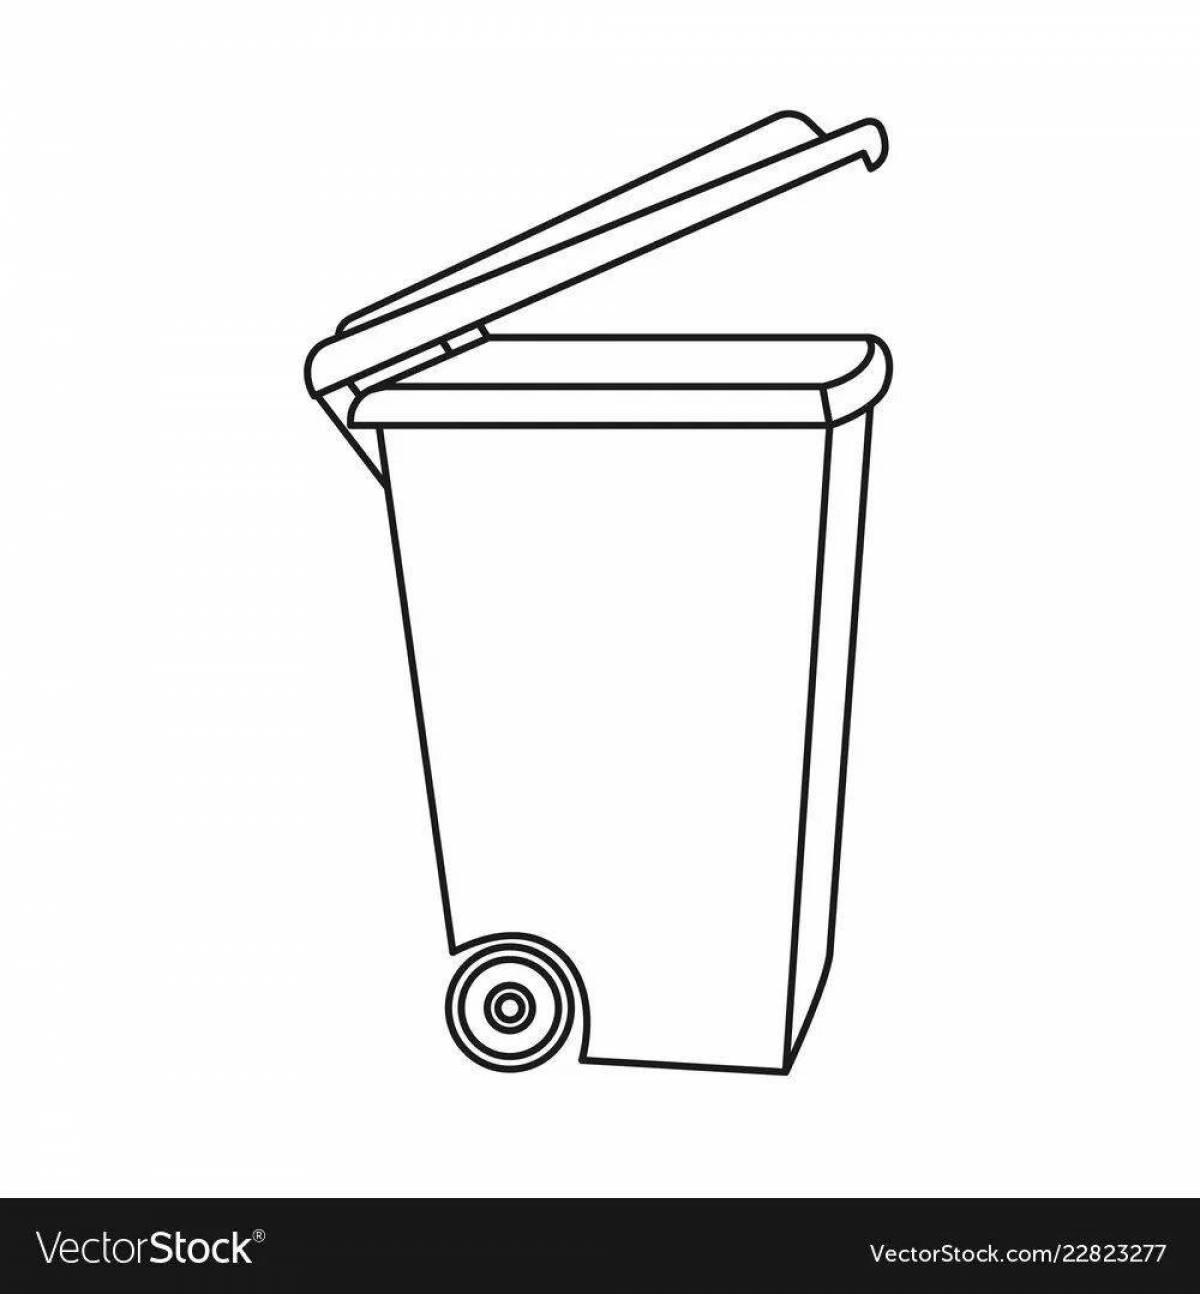 Regal trash can coloring page